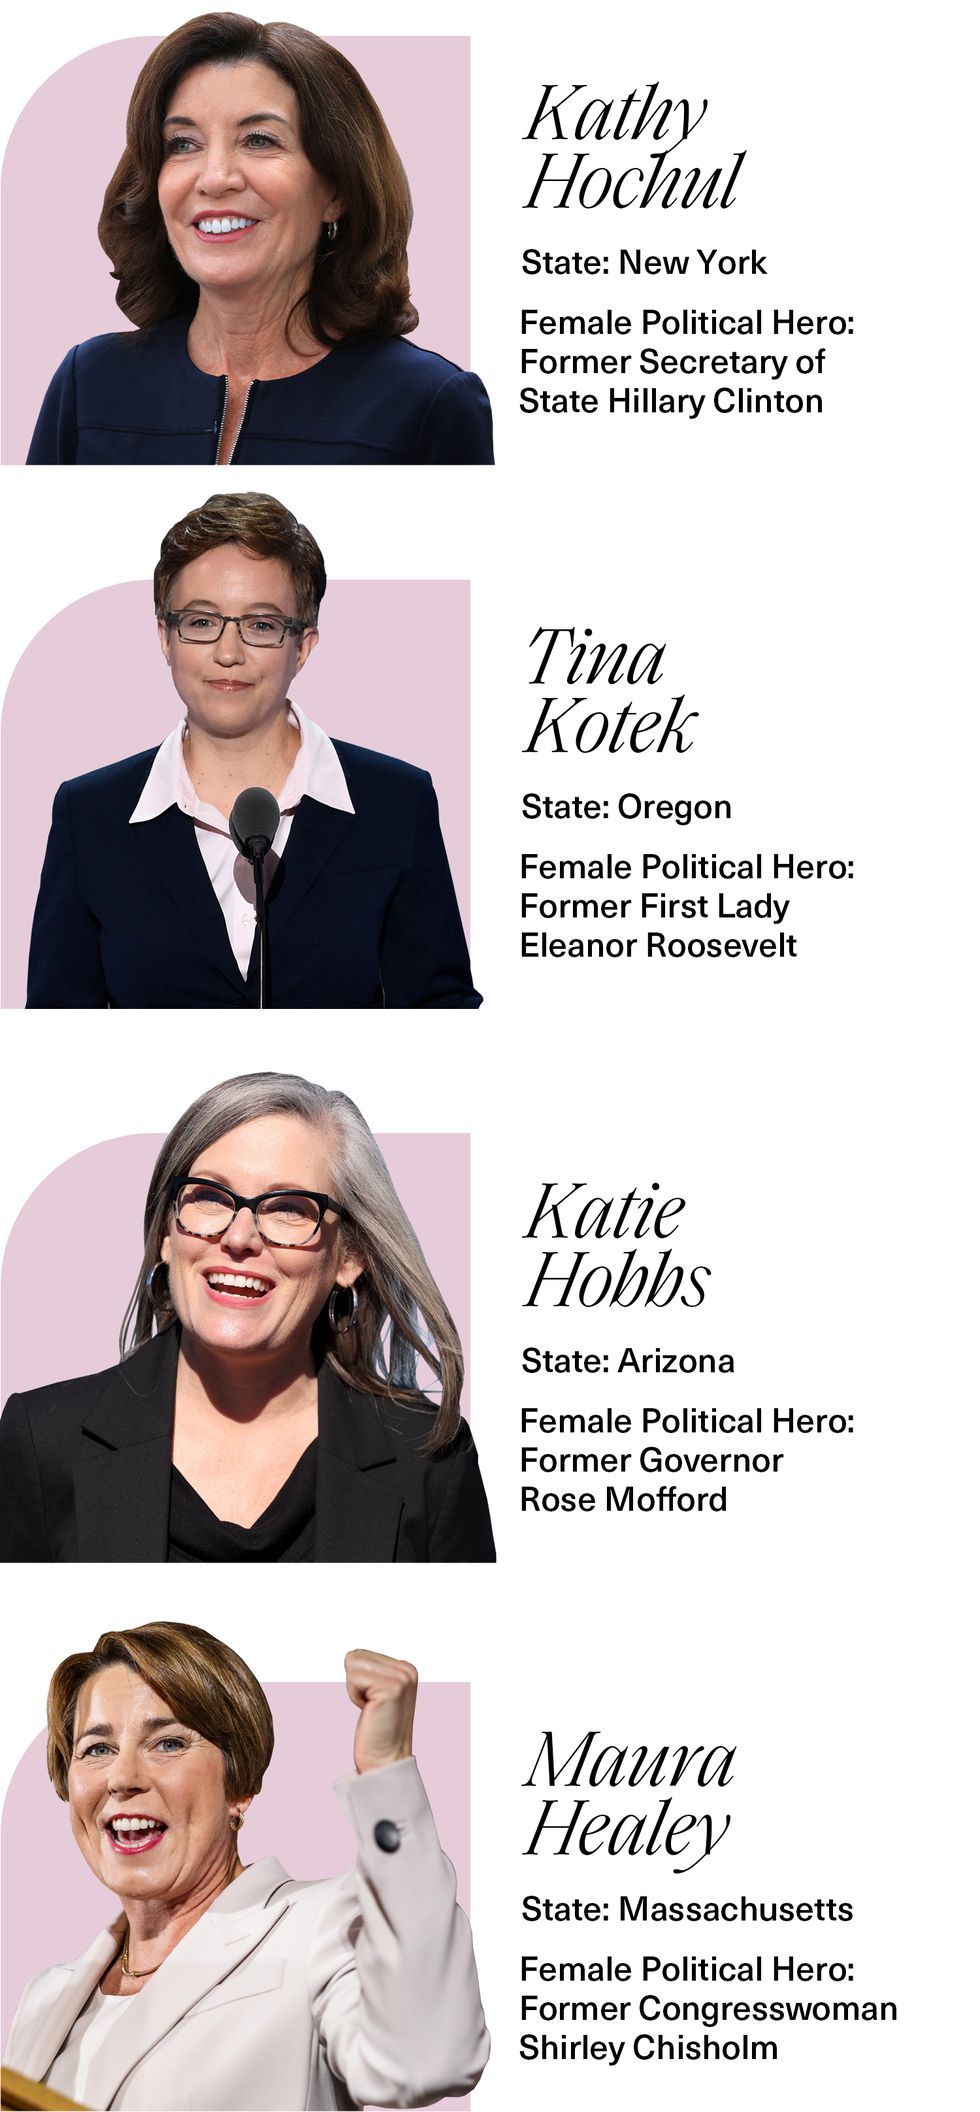 governors against a pink background